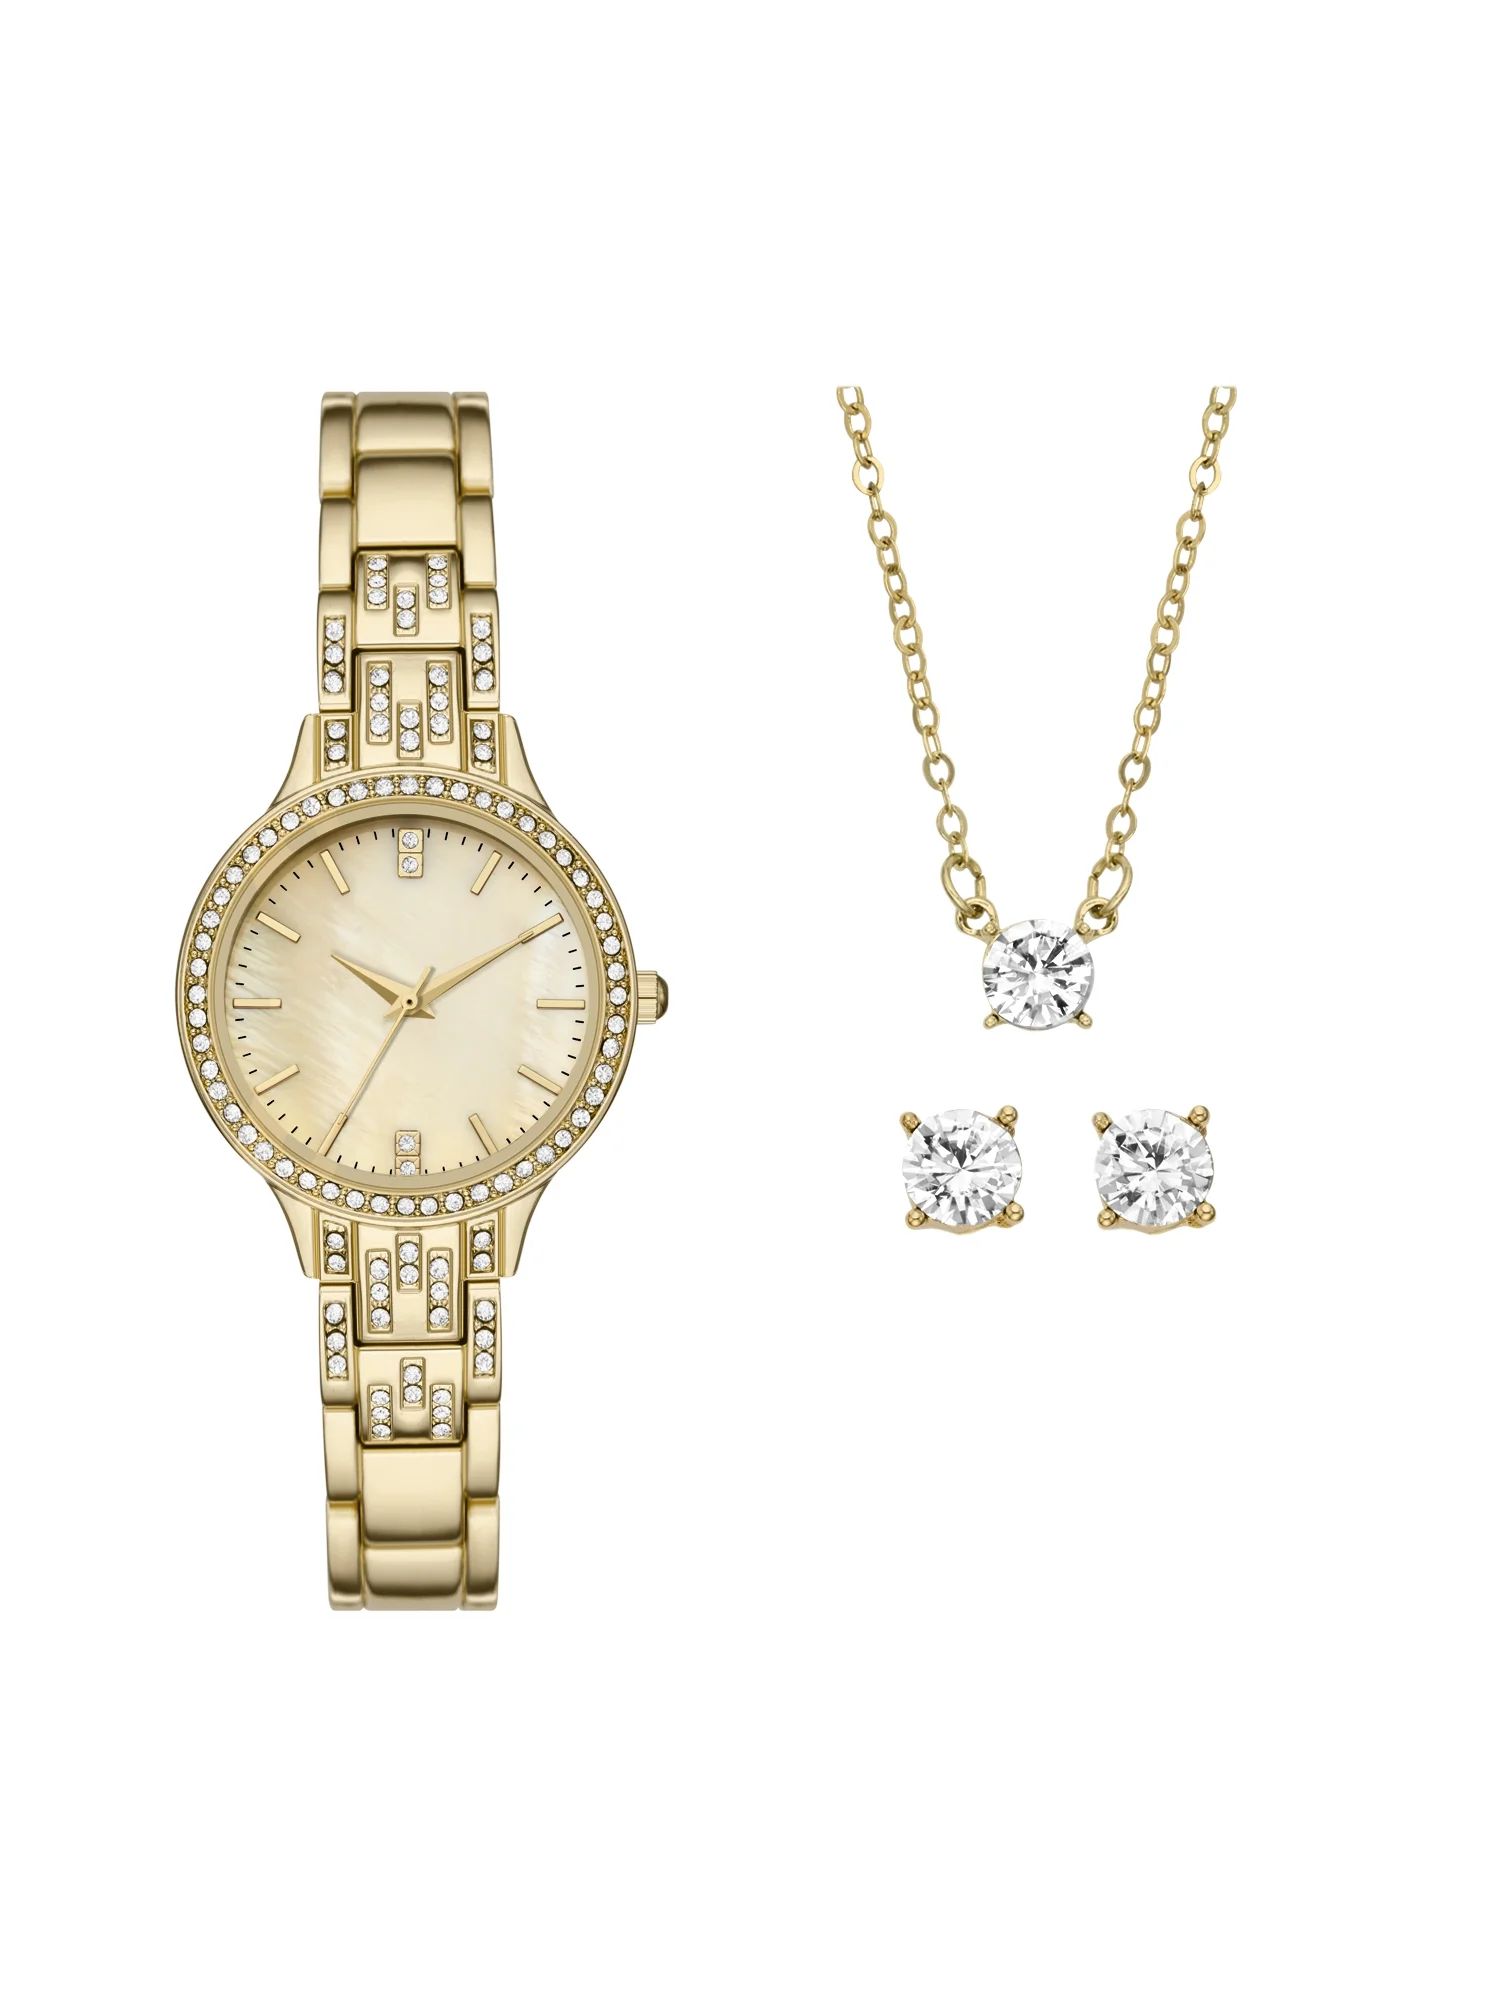 Folio Women's Watch Gift Set: Gold Round Case, Mother of Pearl Dial and 3 Link Bracelet with Crys... | Walmart (US)